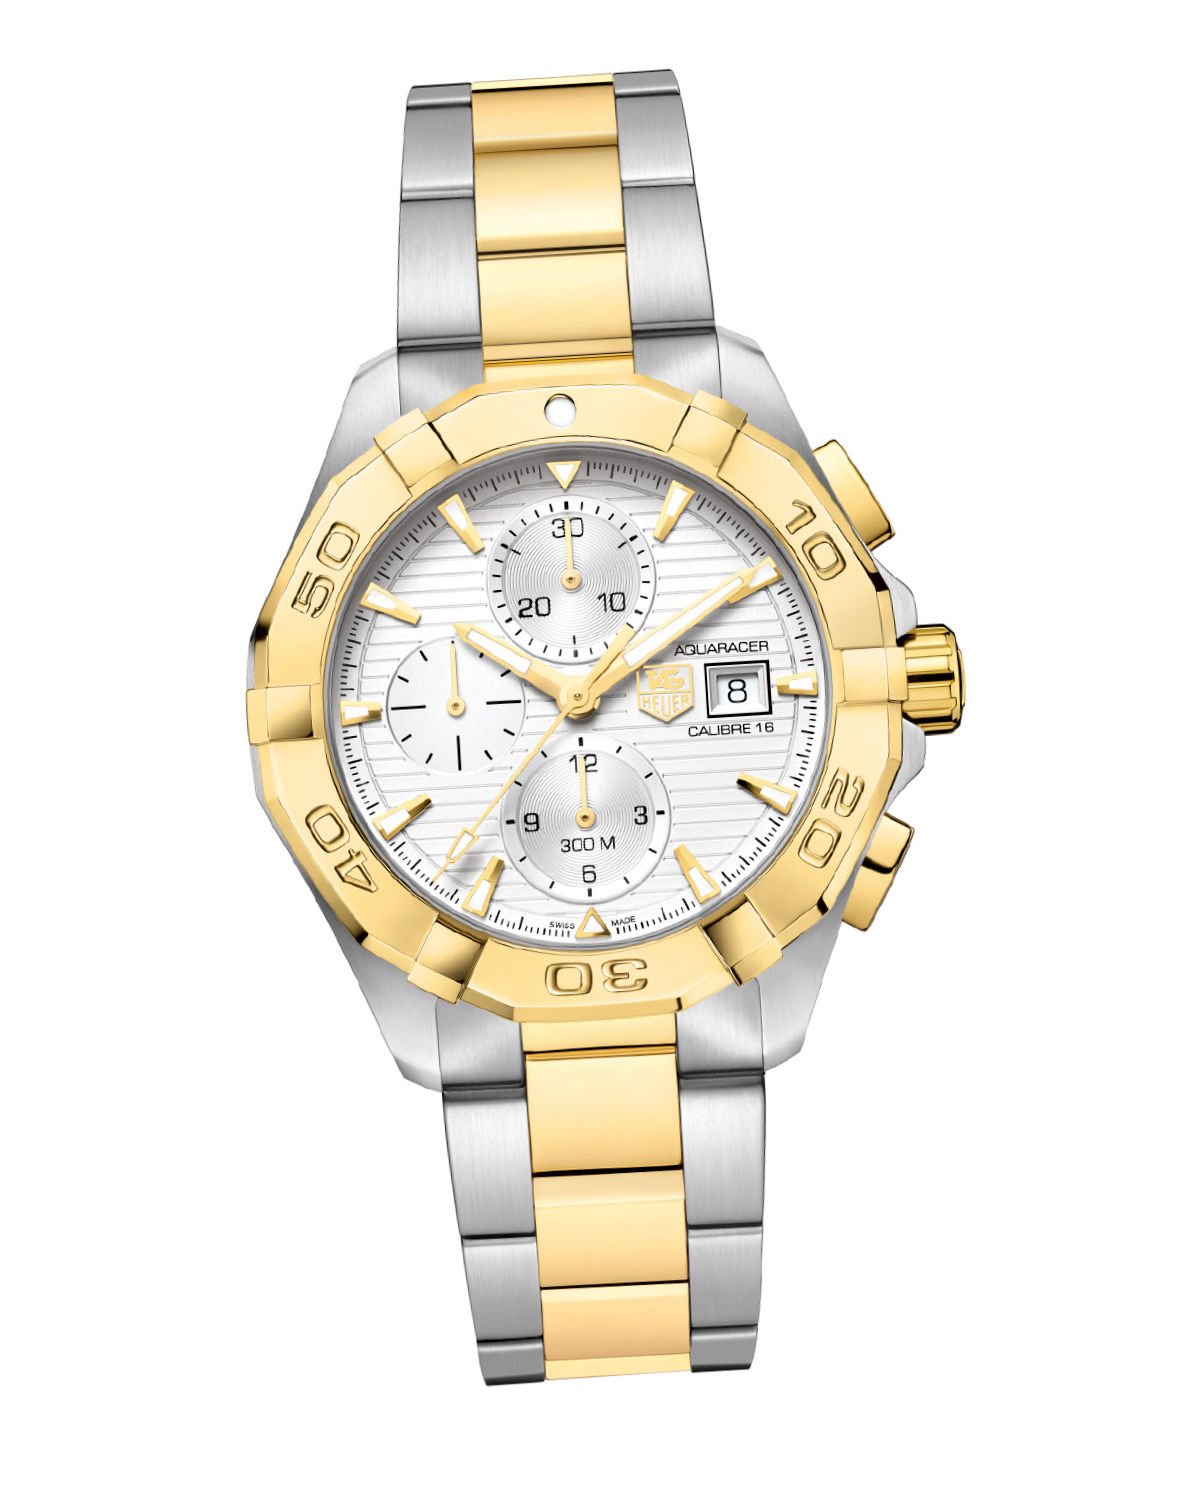 gold-watch-every-budget-Tag-Heuer